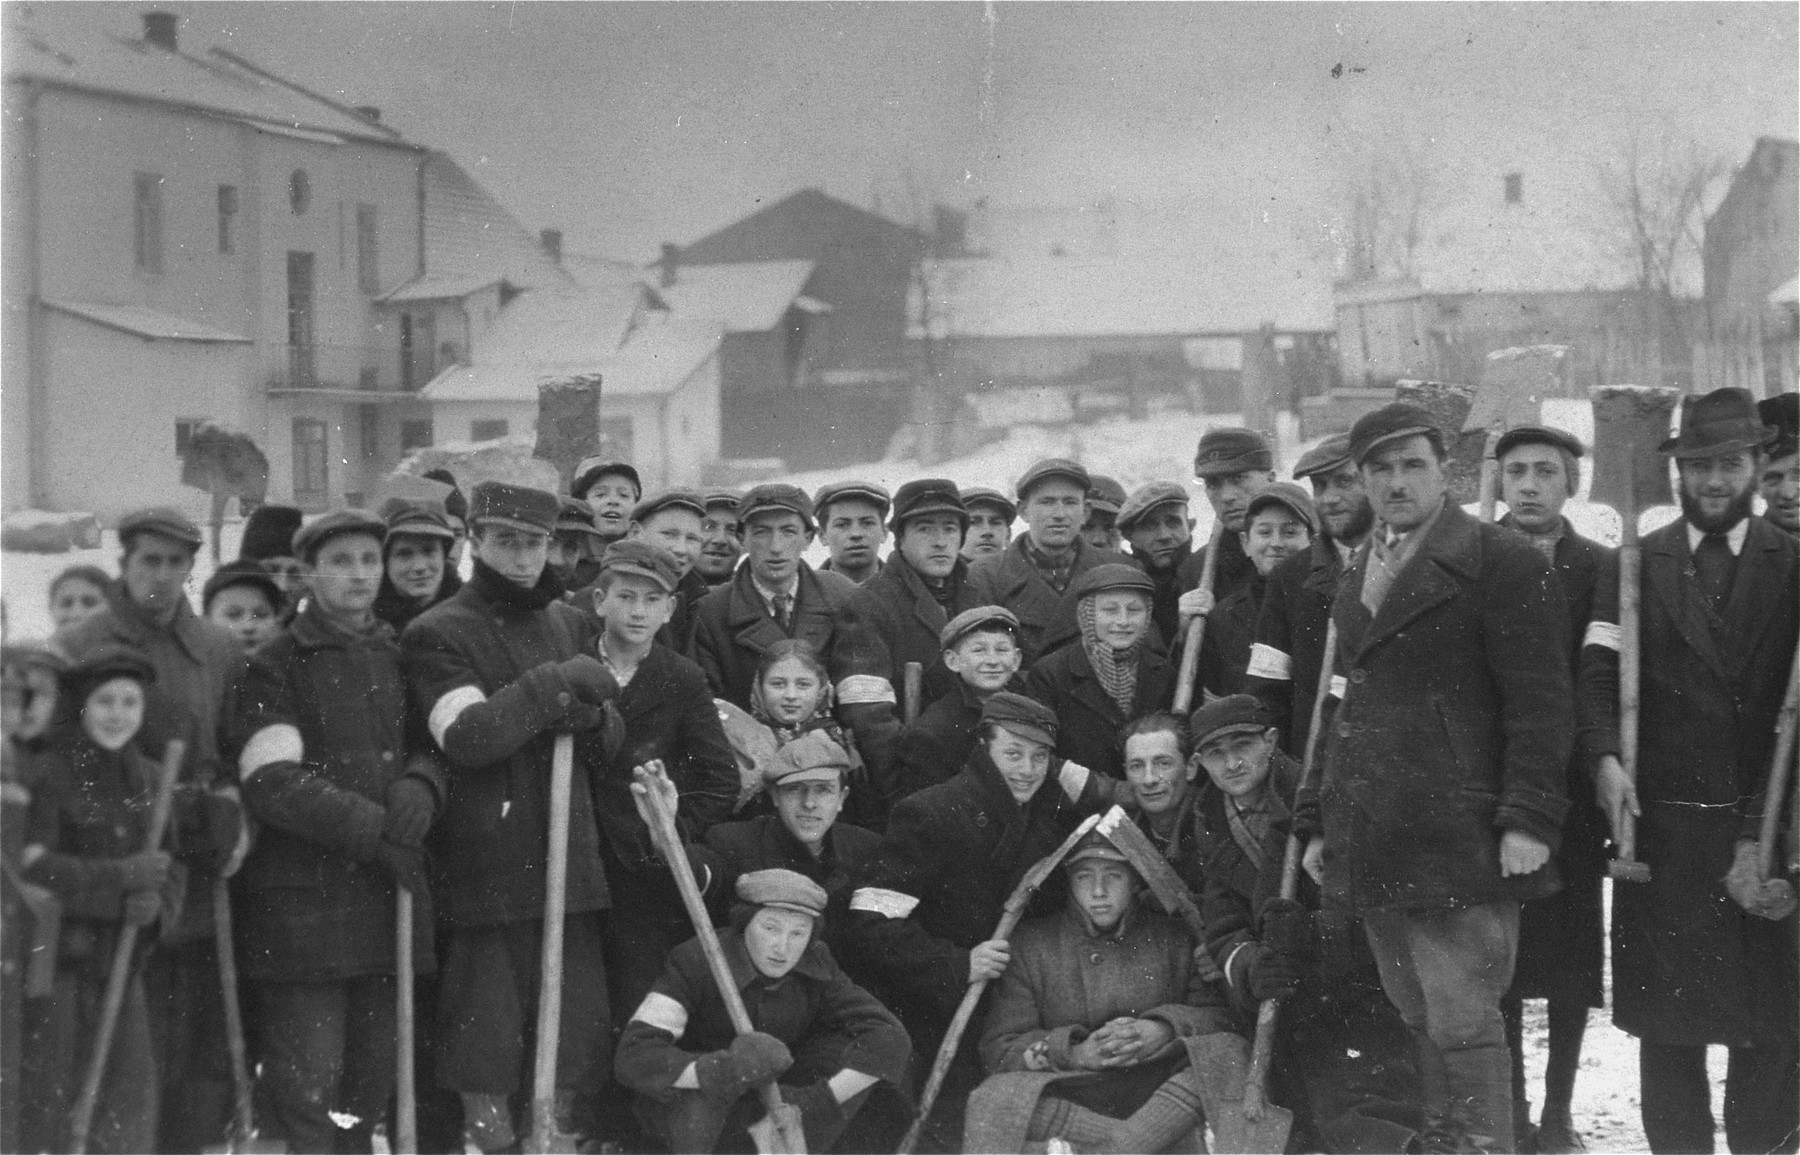 Group portrait of Jews at forced labor in the Kolbuszowa ghetto.